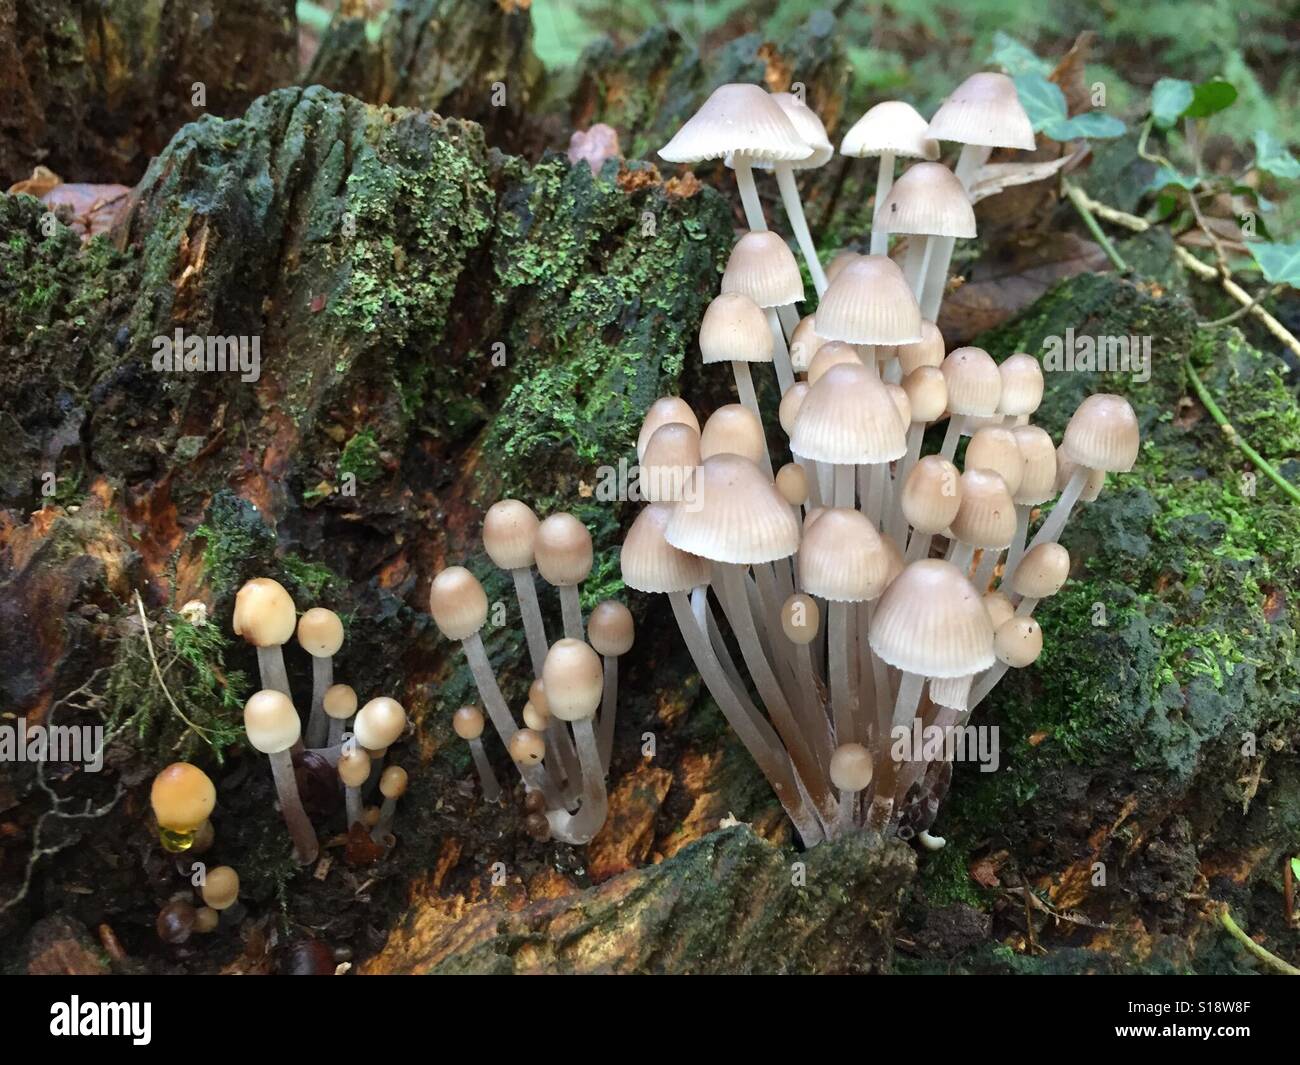 Common bonnet mushrooms growing on a mossy rotten log in New Forest National Park, Dorset. U.K. Stock Photo